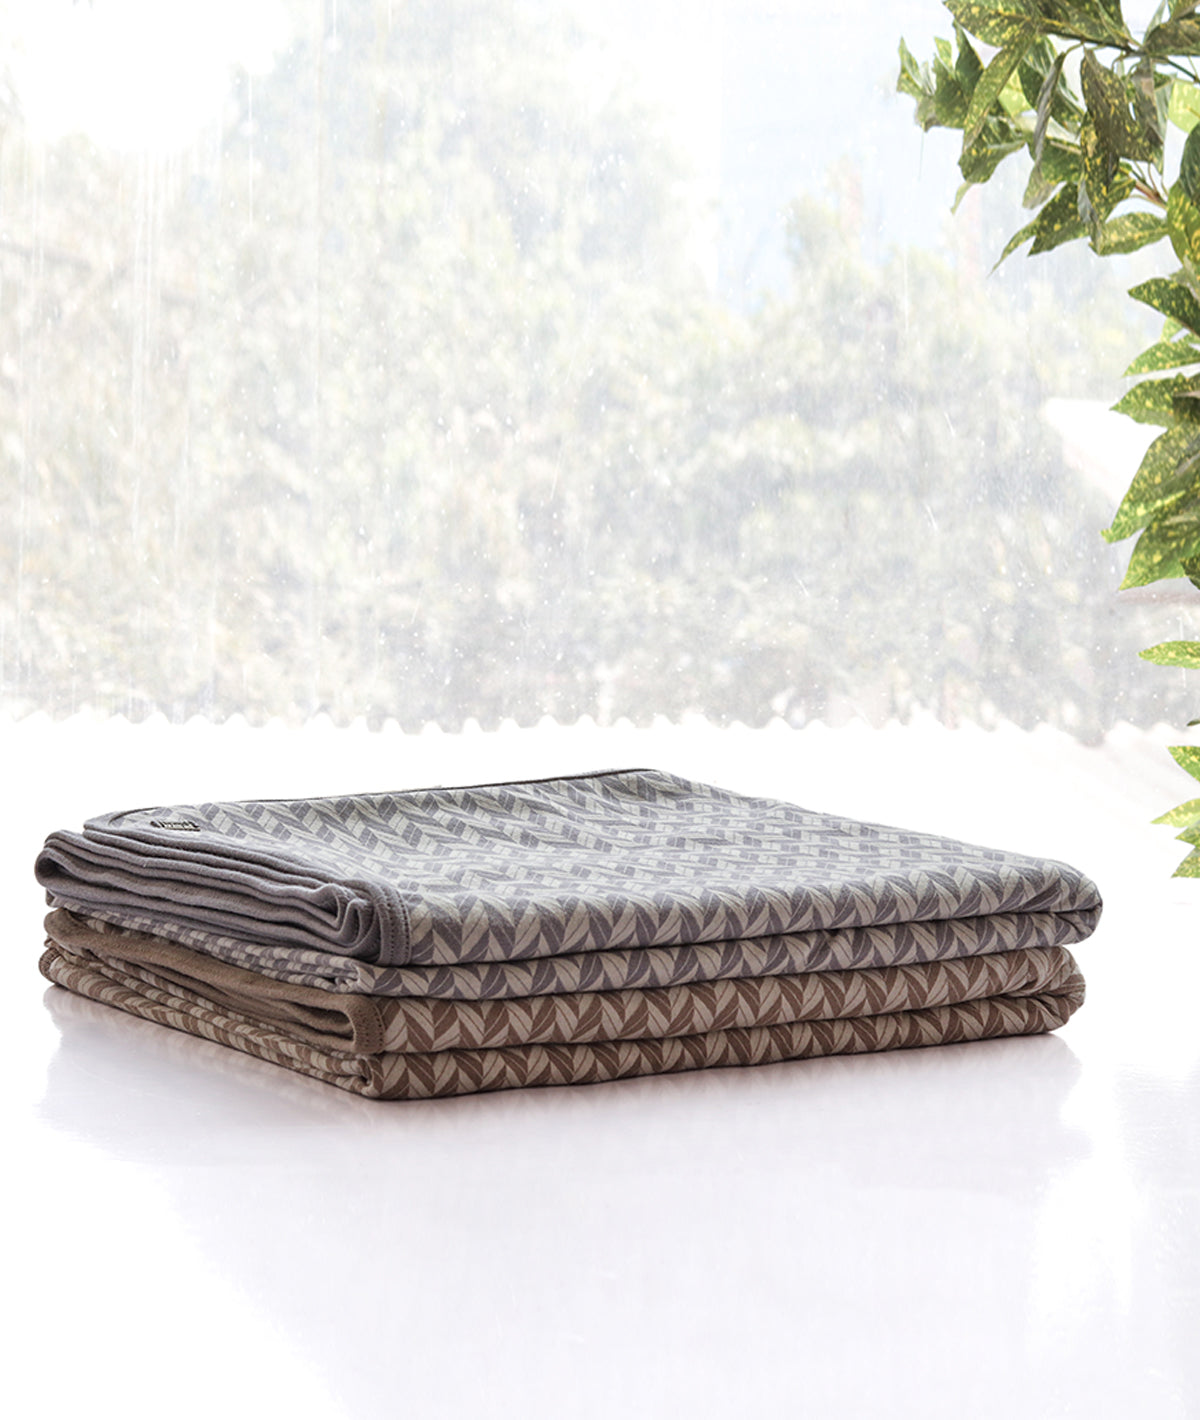 Eleanor Cotton Knitted Single Bed Ac Blanket / Dohar For Round The Year Use (Set of 2 Pcs) (Stone & Natural)